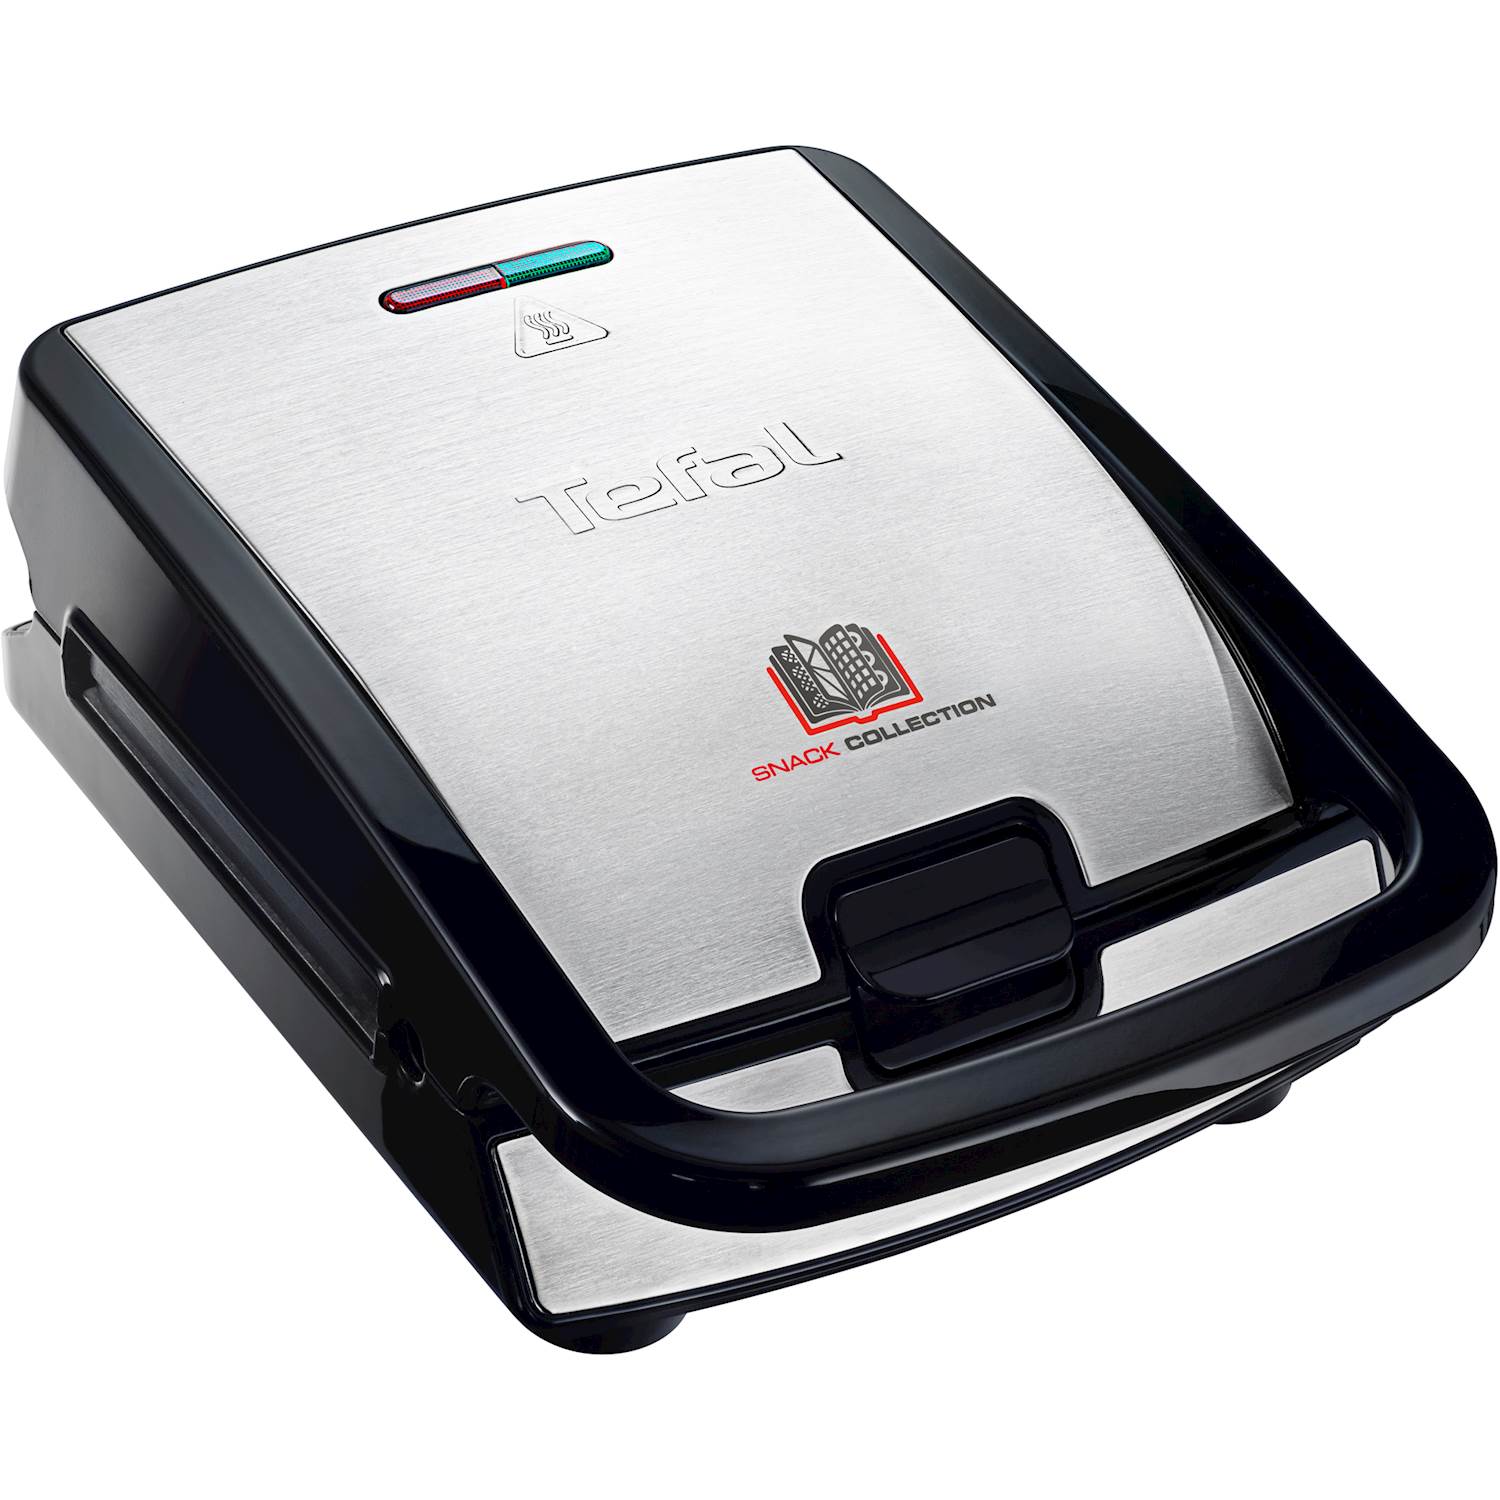 Tefal Snack Collection multi